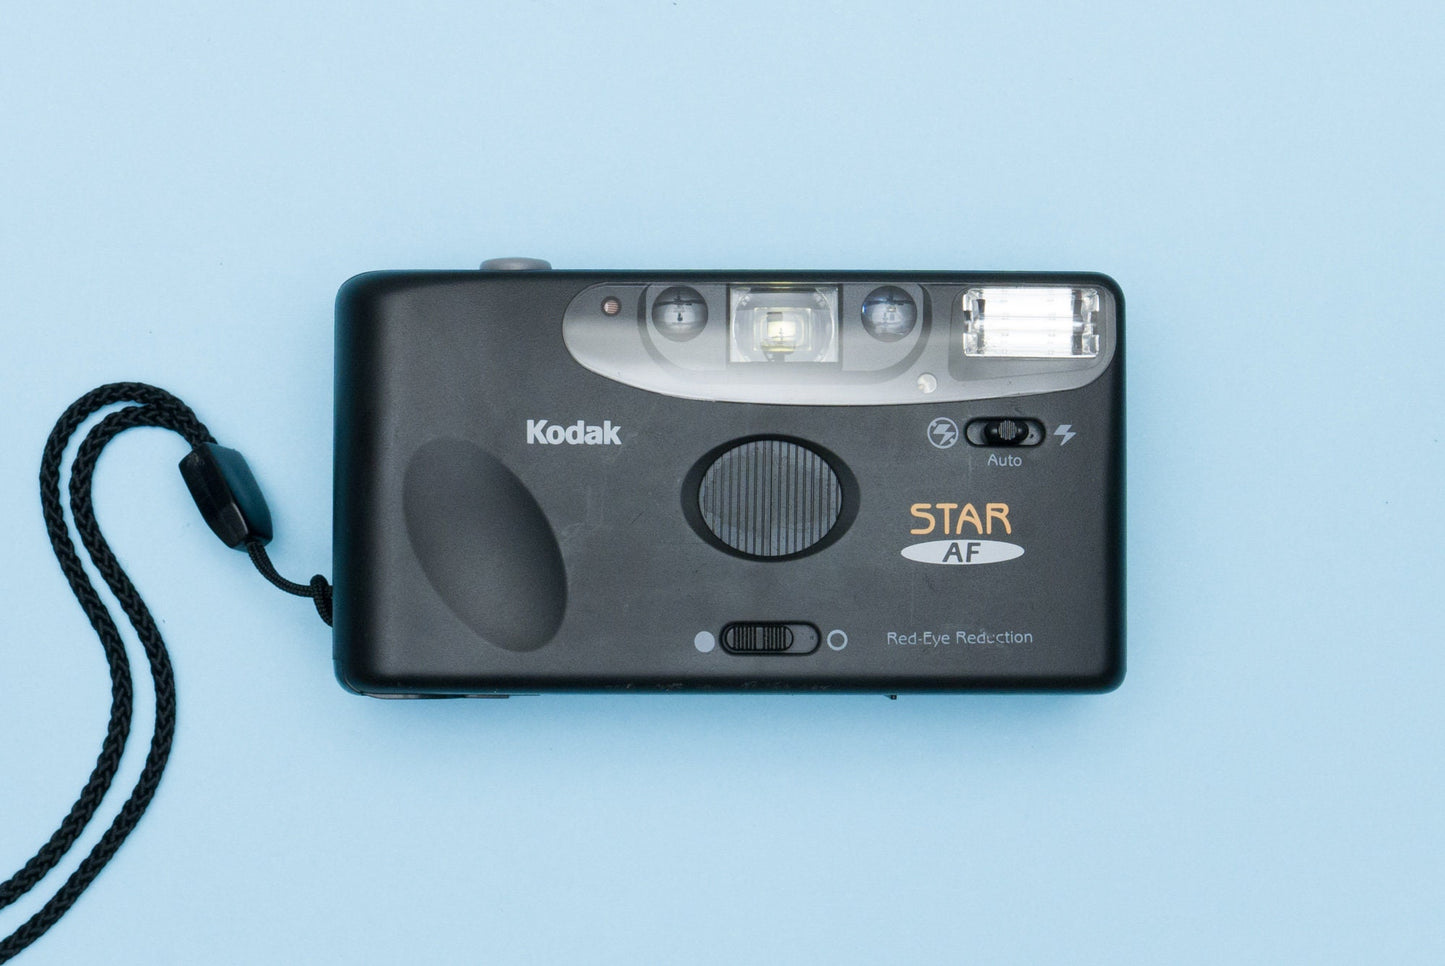 Kodak STAR AF Compact 35mm Point and Shoot Film Camera